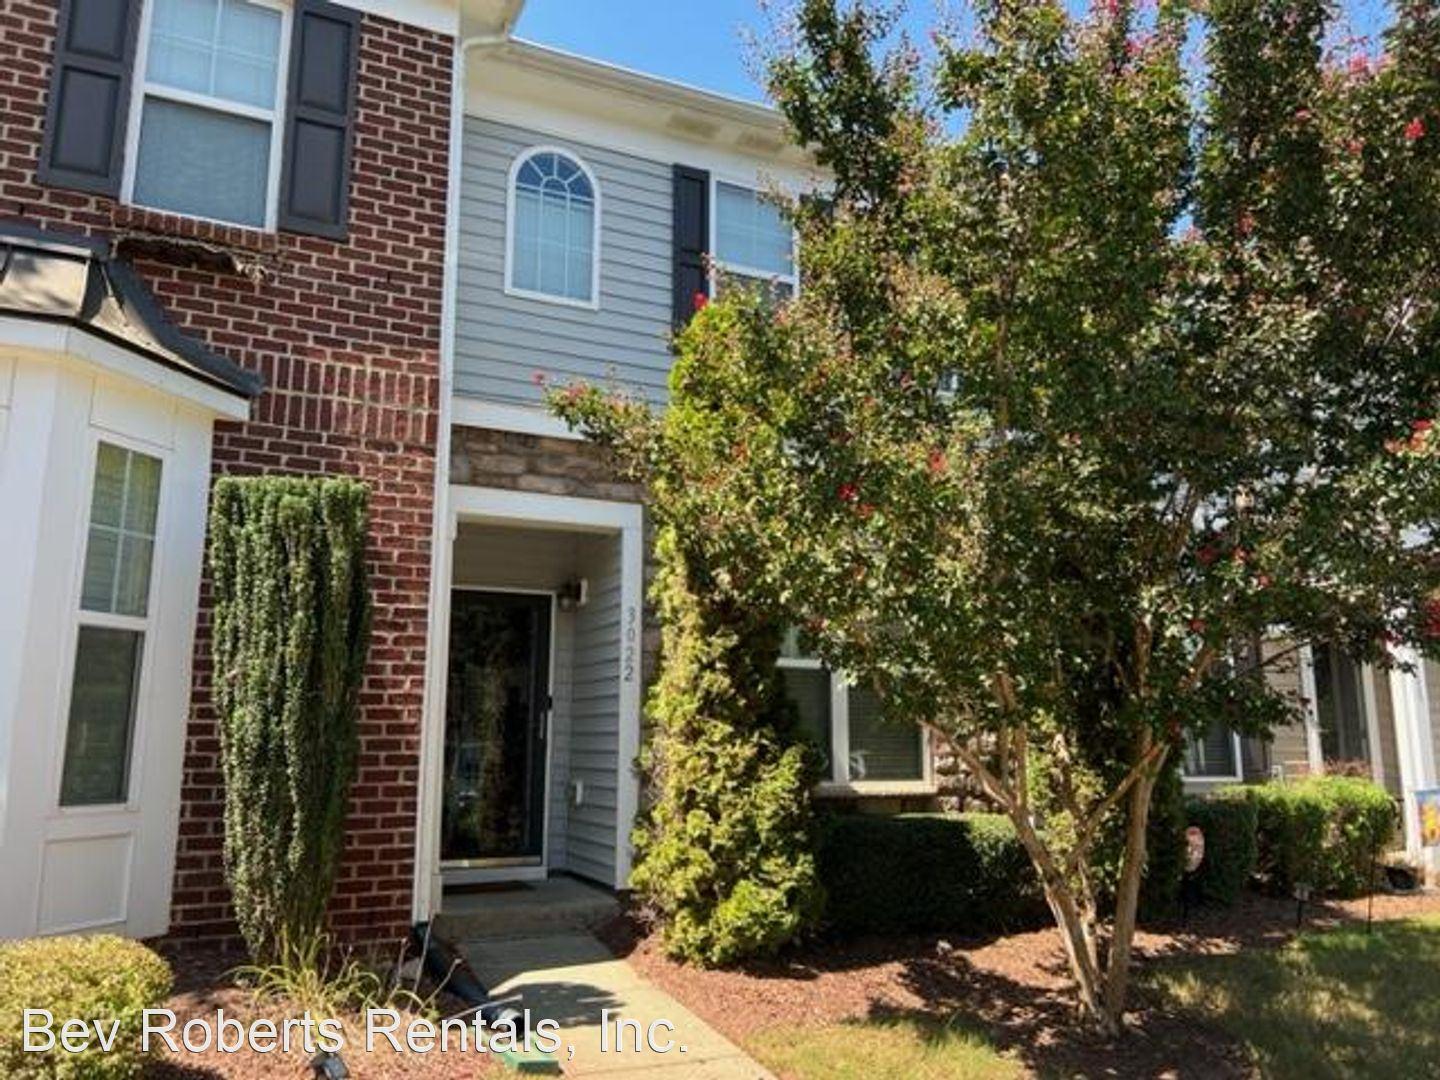 Photo 1 of 28 of 3022 Berkeley Springs Place (UnitID 12375674) townhome